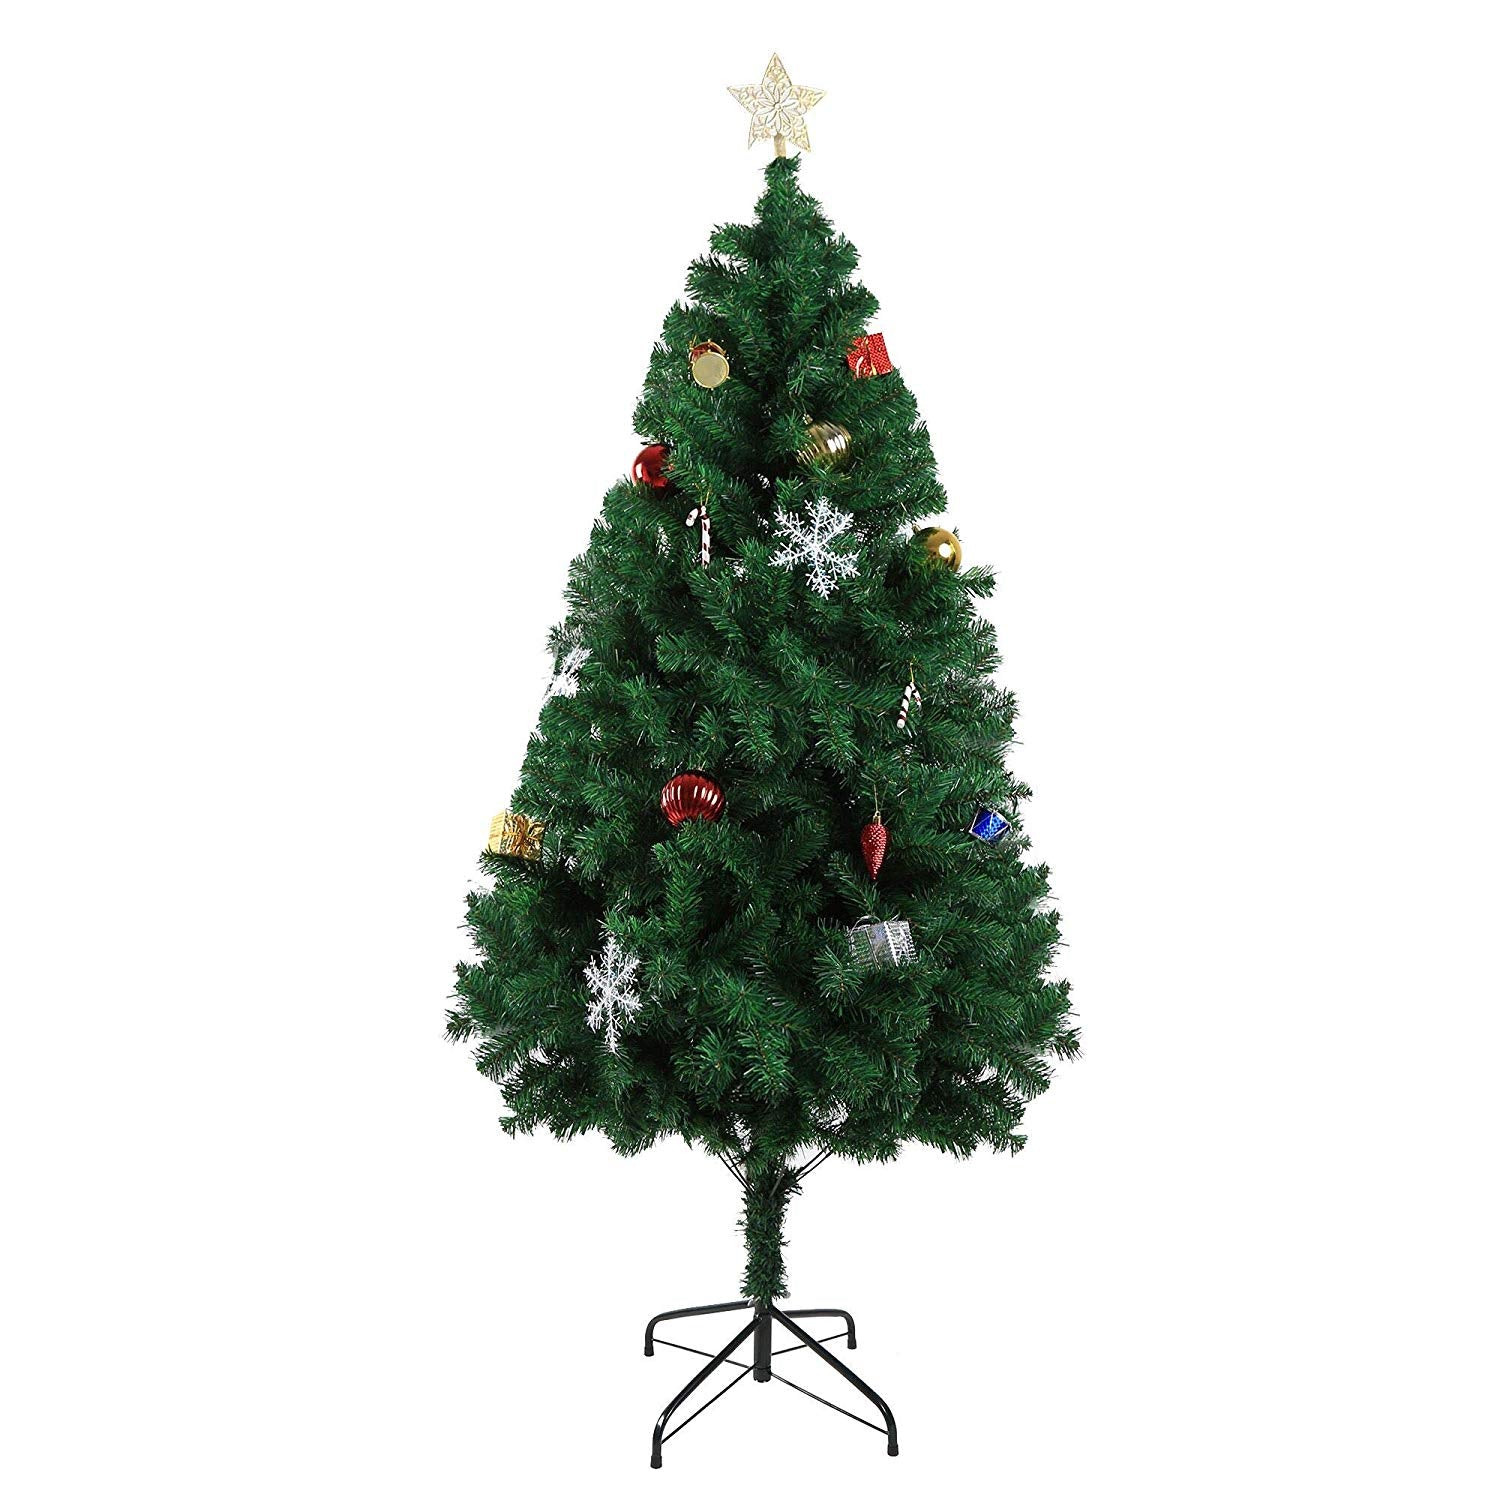 5' Premium Spruce Artificial Christmas Tree w/Metal Stand, Green